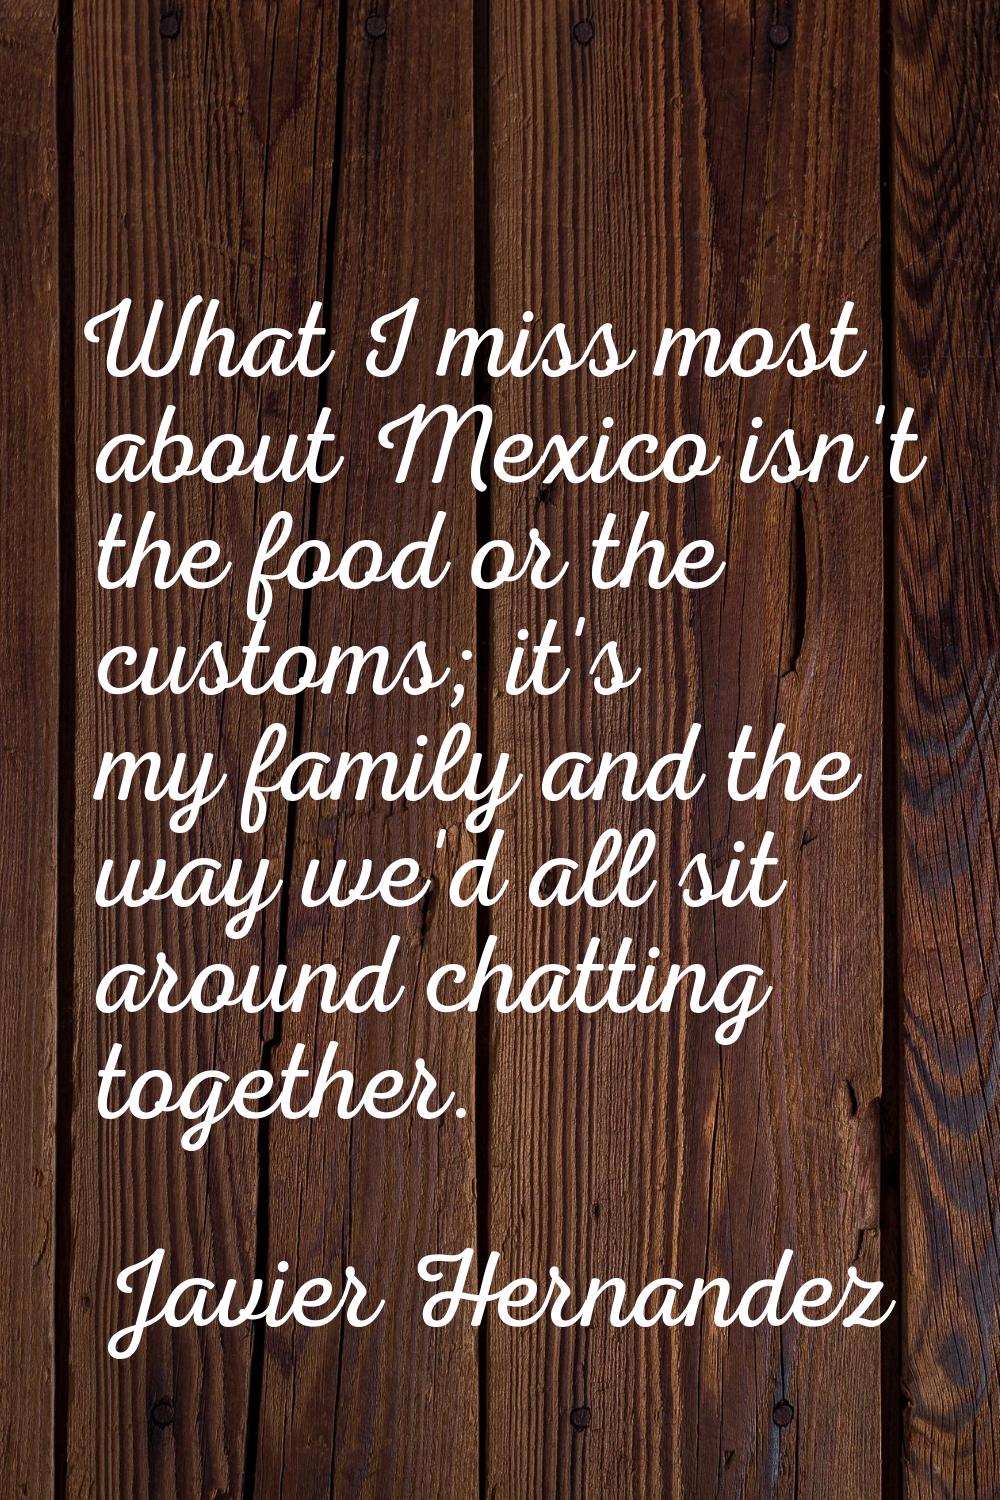 What I miss most about Mexico isn't the food or the customs; it's my family and the way we'd all si